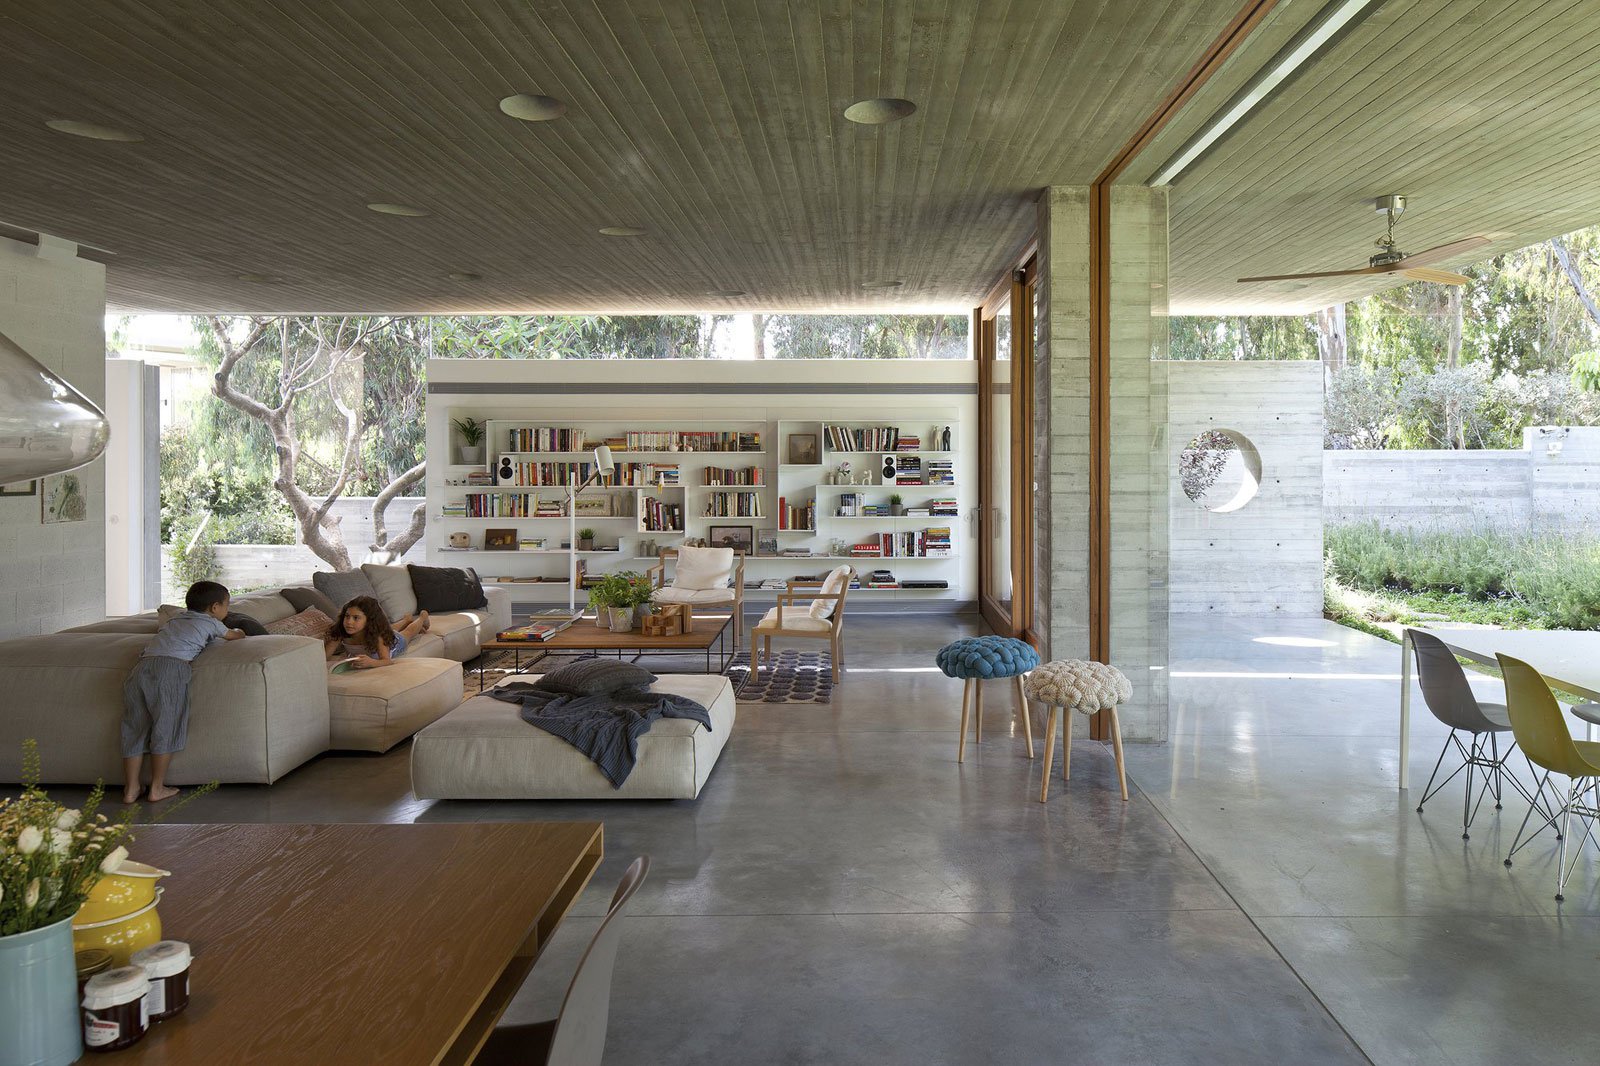 A-House-for-an-Architect-10